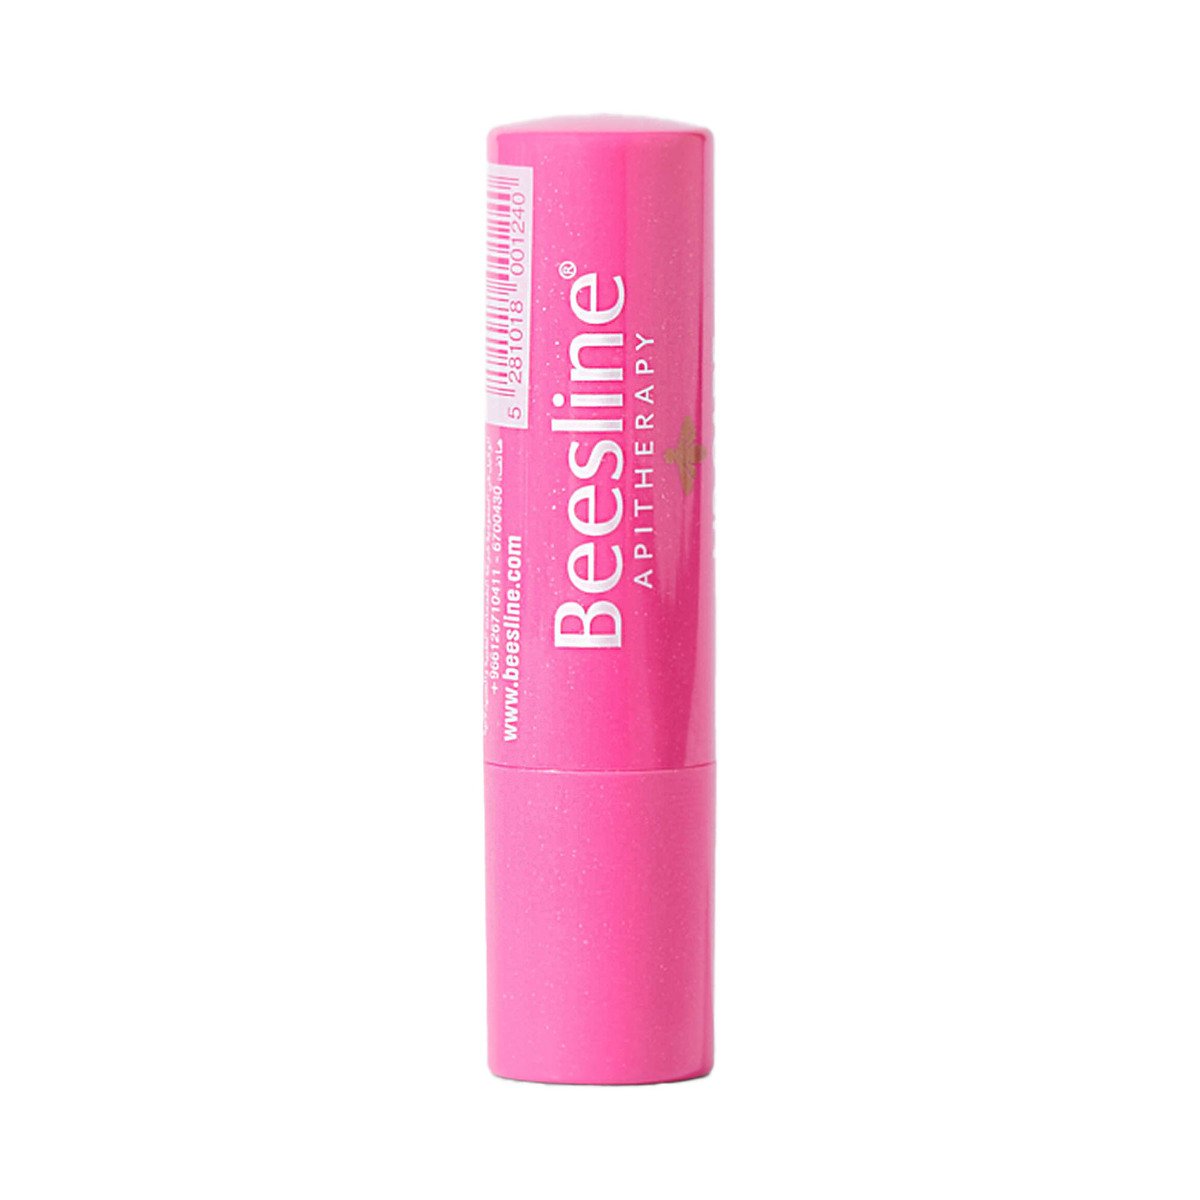 Beesline Apitherapy Lip Care Shimmery Strawberry, 4 g